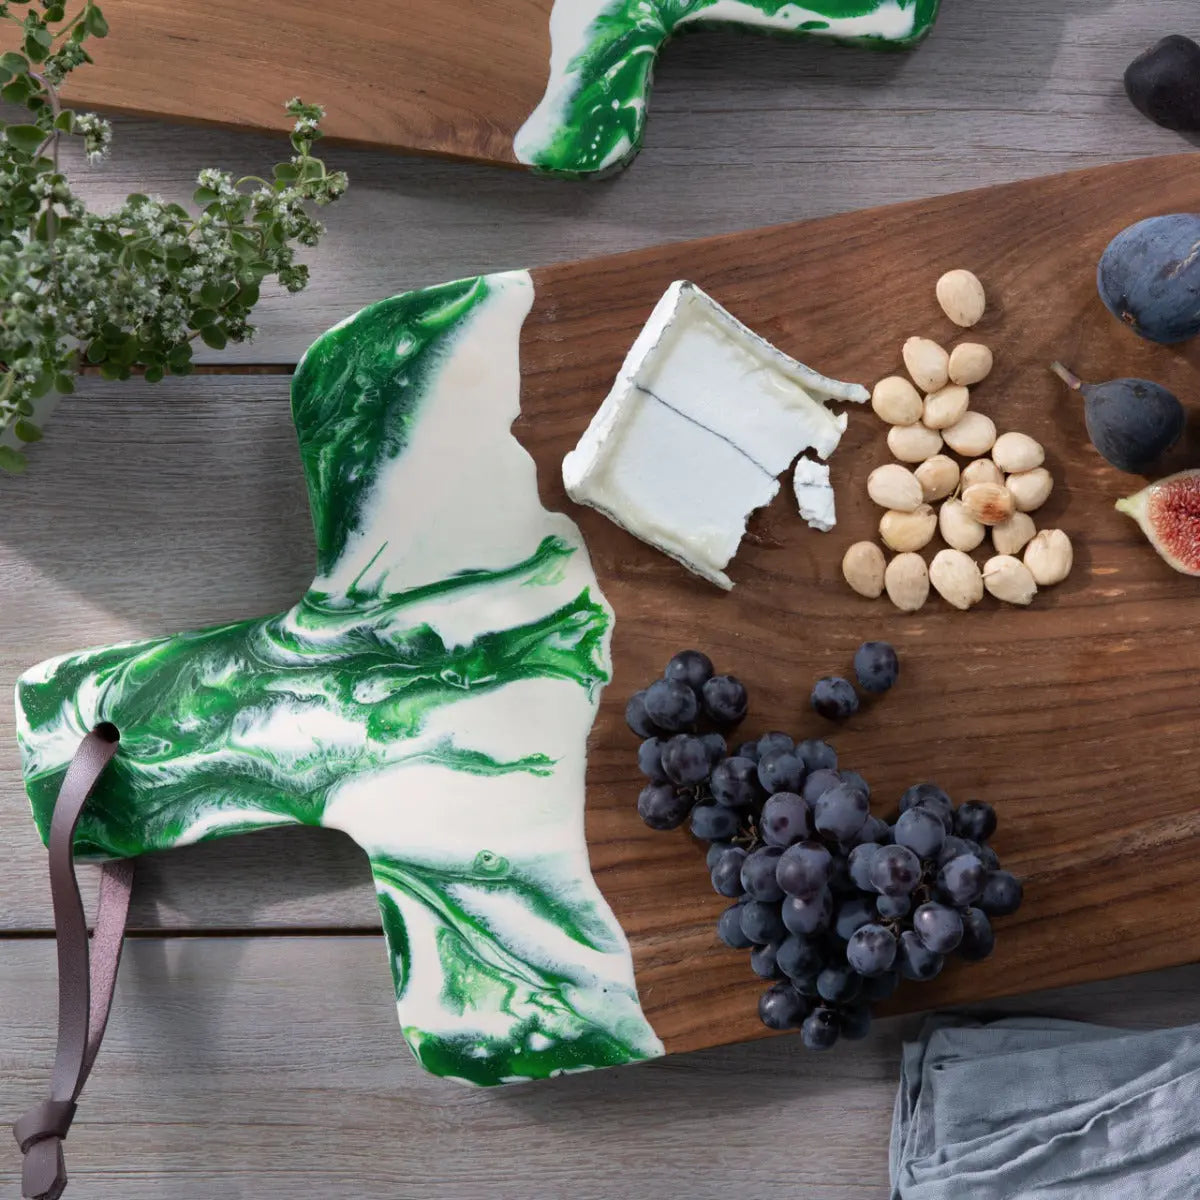 Blue Pheasant Austin Swirled Green Resin, Natural Teak Serving Board with blueberries, nuts and food in a room